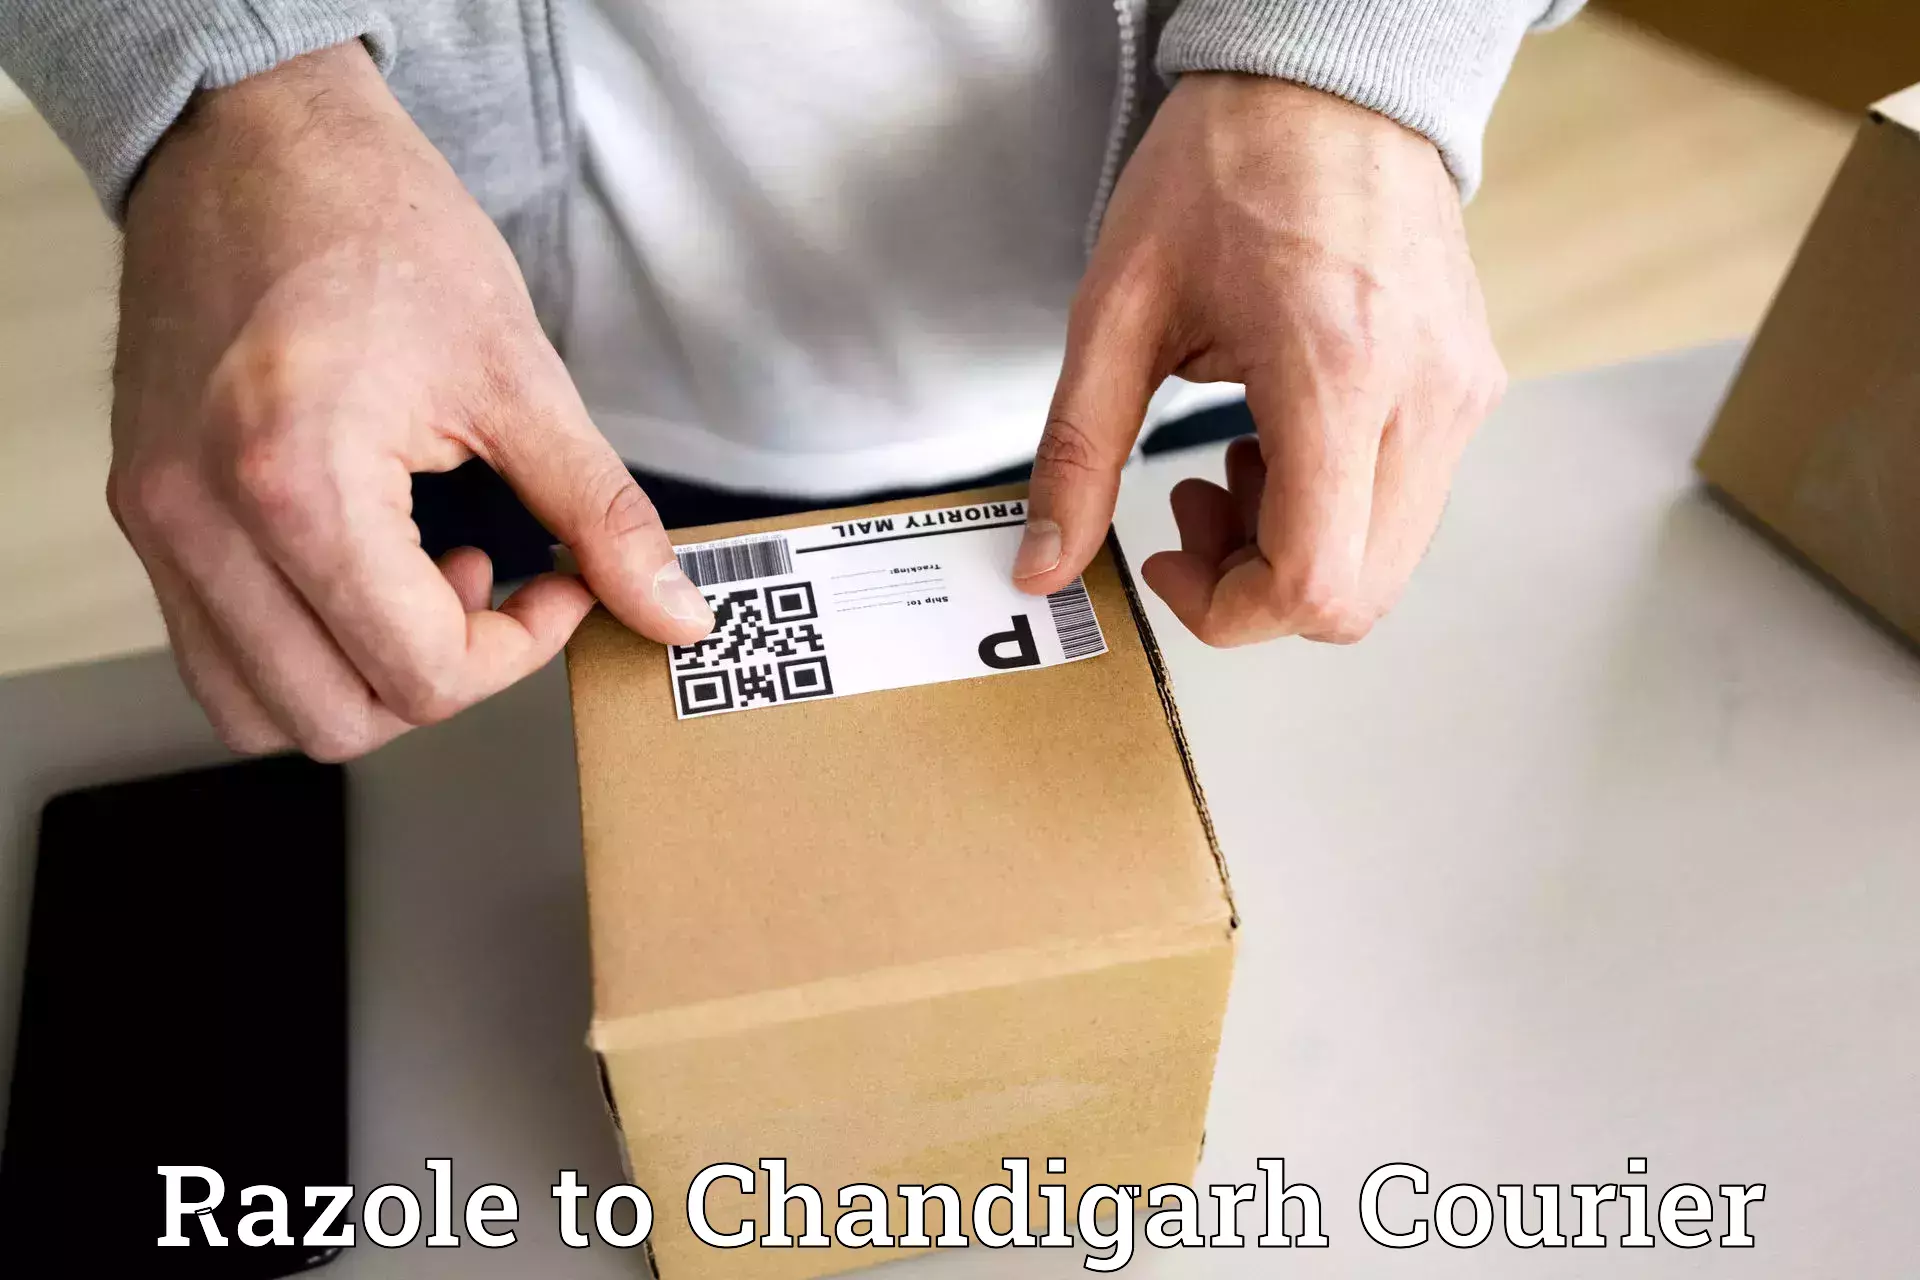 Full-service courier options Razole to Chandigarh